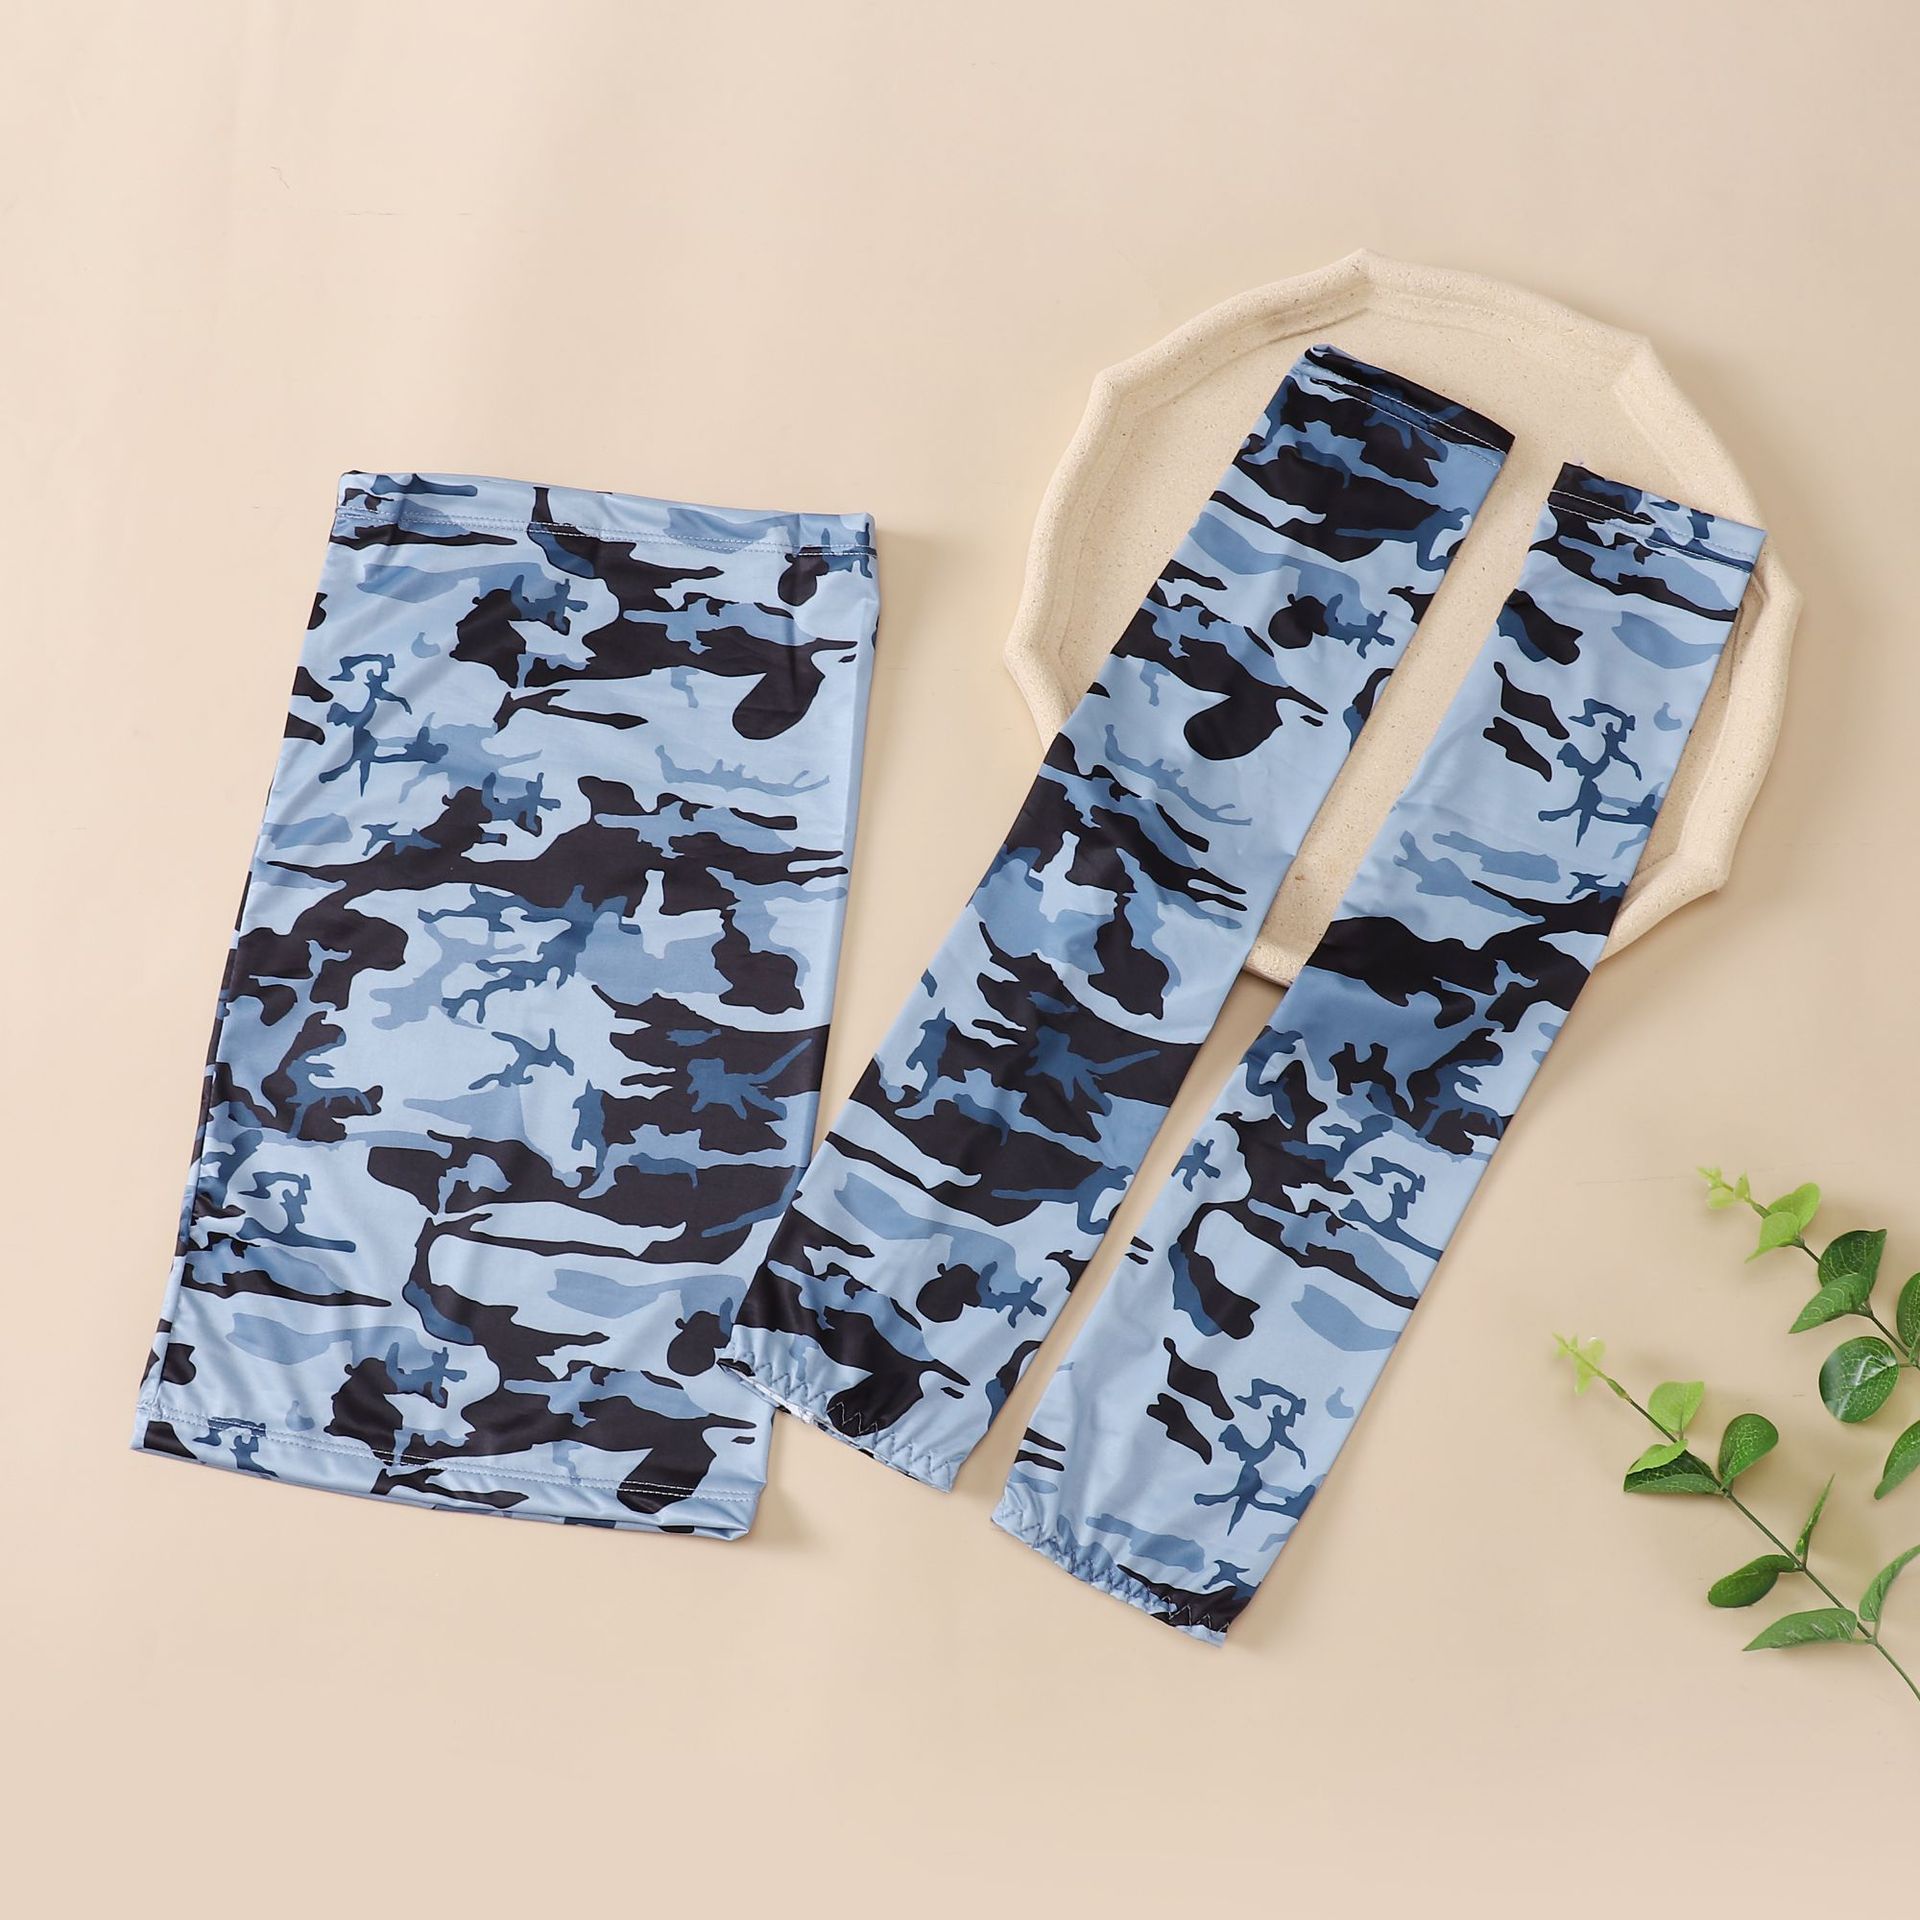 22 Summer Camouflage Sunscreen Oversleeve Ice Sleeve Wholesale Men's and Women's Outdoor Cycling UV Protection Sunscreen Face Towel Mask